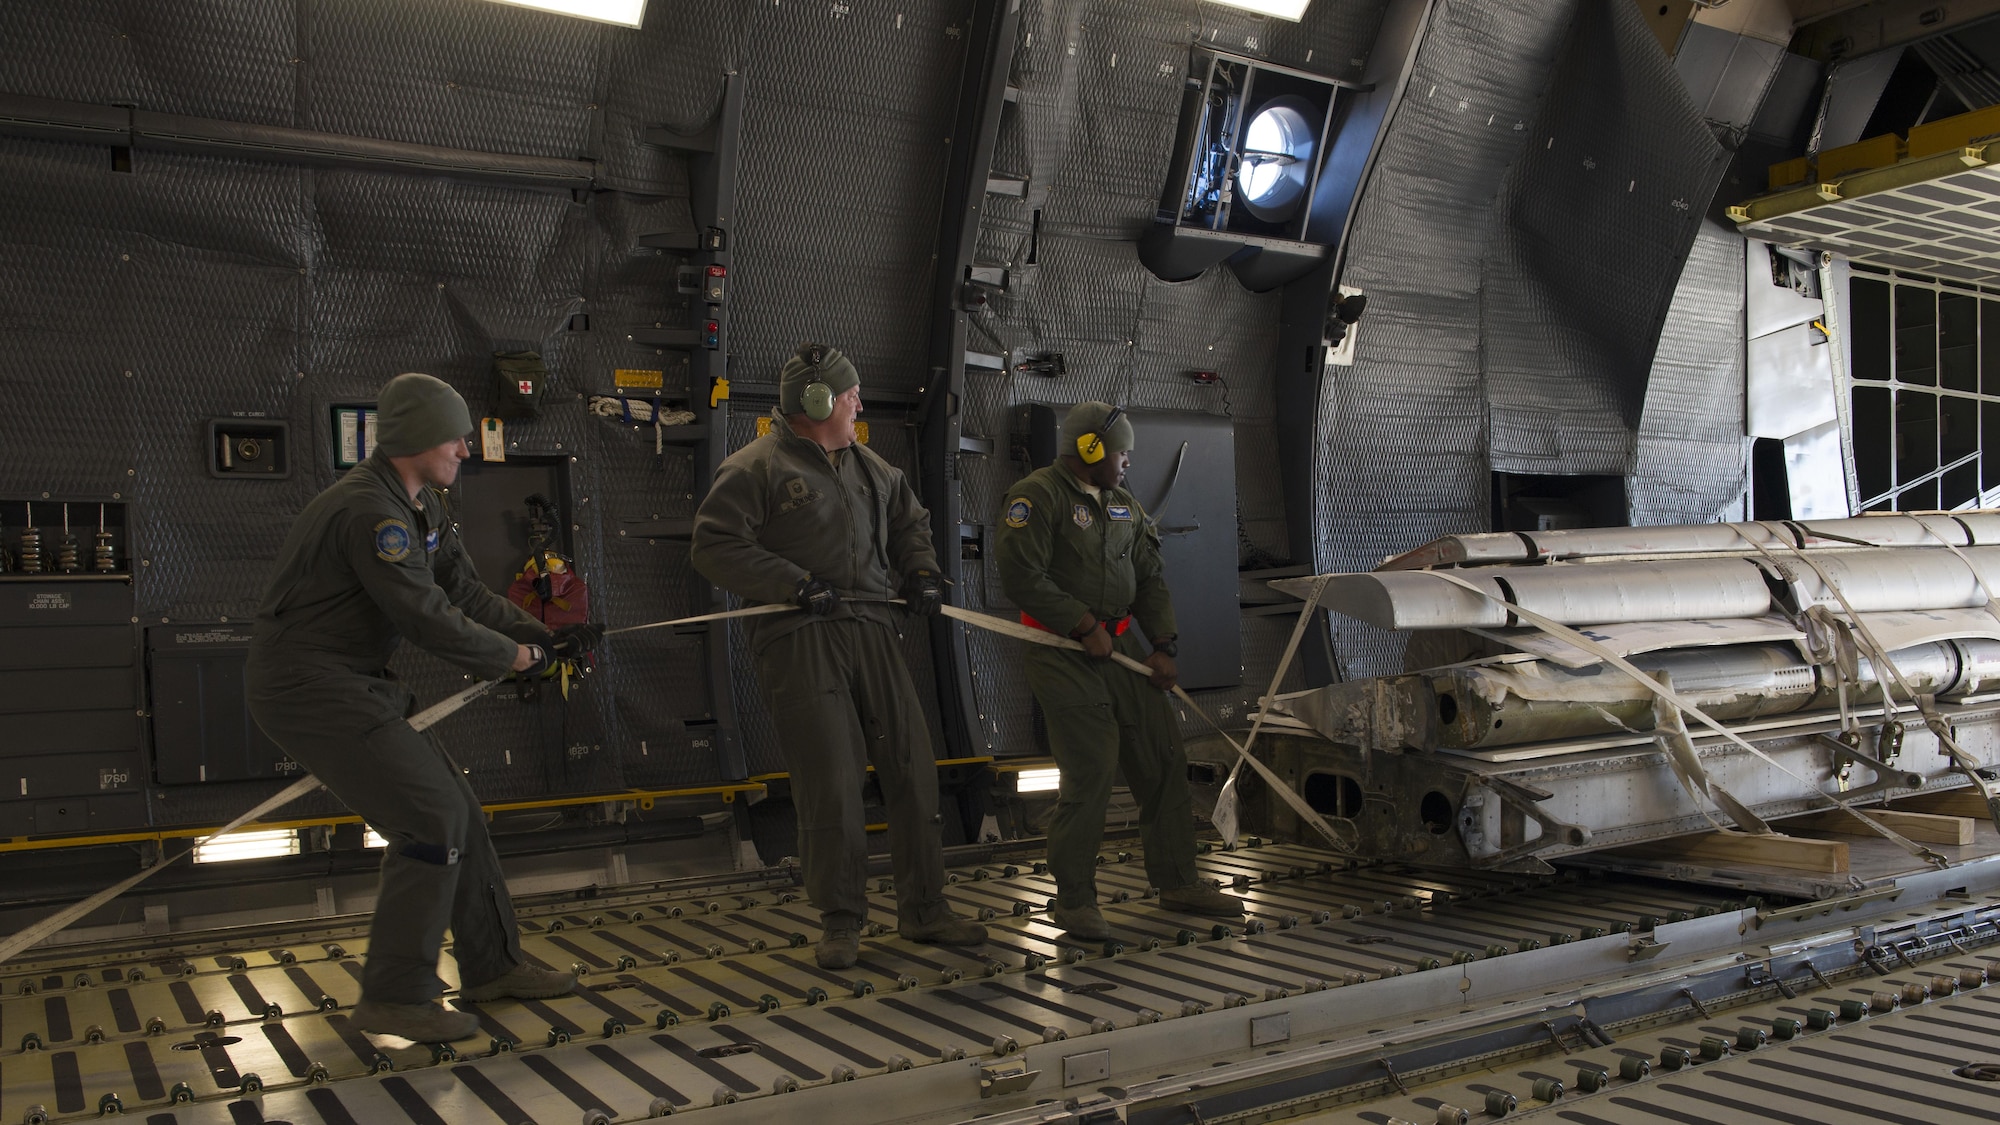 Loadmasters from the 709th Airlift Squadron pull portions of the Fairchild C-119B Flying Boxcar #48-0352 “Am Can Co Special” into the cargo bay of a C-5M Super Galaxy Dec. 19, 2016, at Edwards Air Force Base, Calif. This airlift mission was used as training experience for the new loadmasters. (U.S. Air Force photo by Senior Airman Zachary Cacicia)